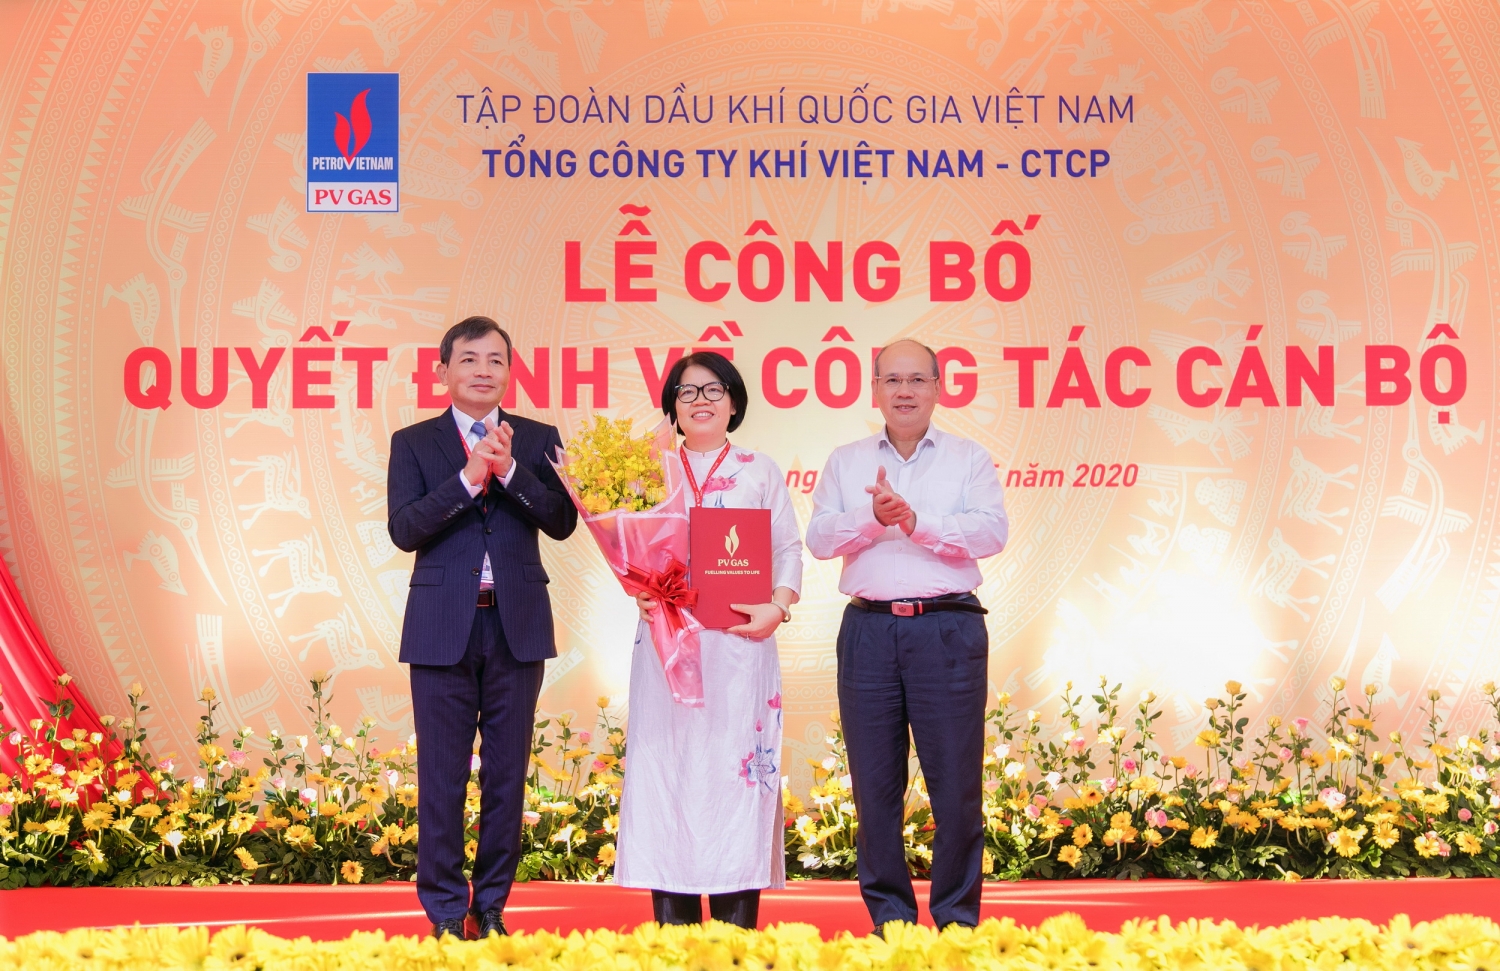 pv gas to chuc le cong bo quyet dinh ve cong tac can bo